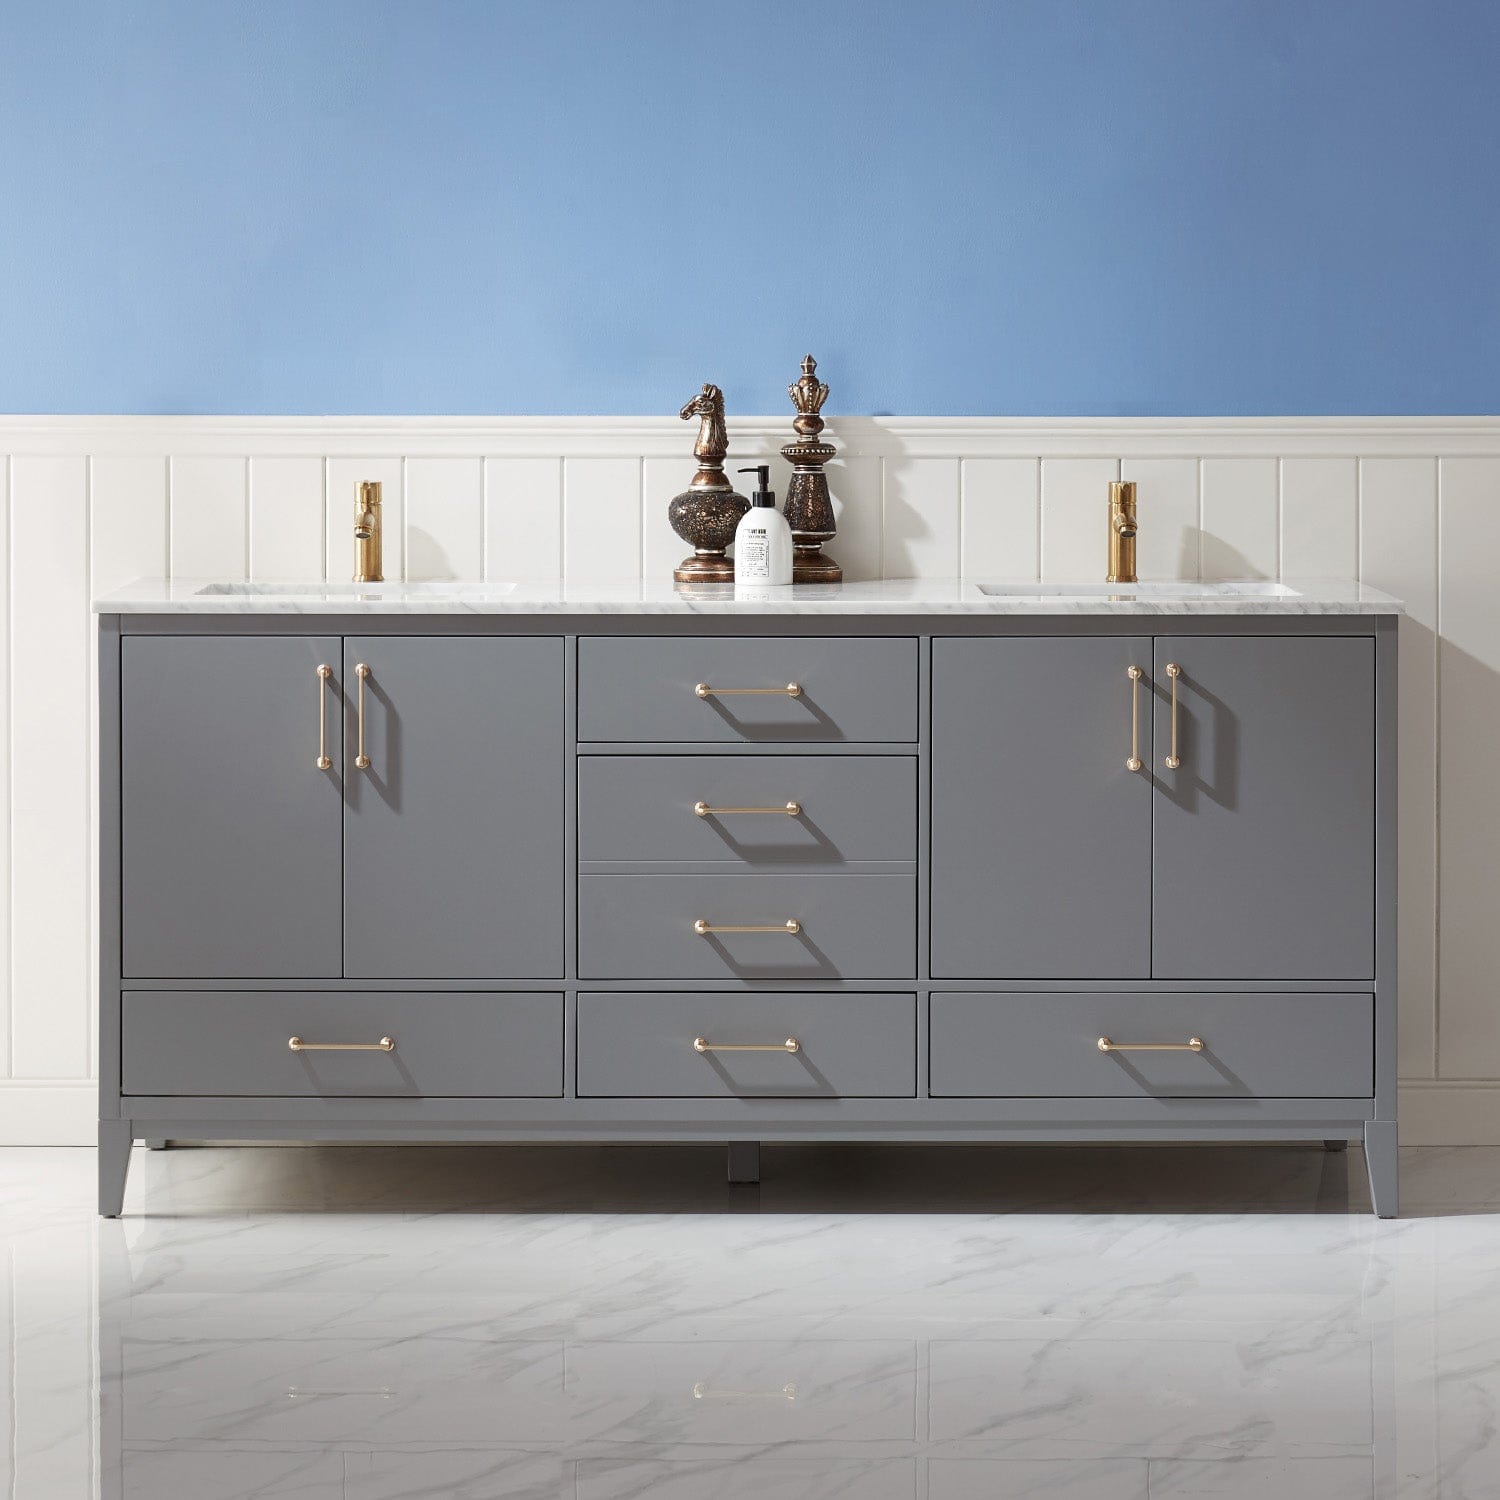 Altair Sutton 72" Double Bathroom Vanity Set in Gray and Carrara White Marble Countertop without Mirror 541072-GR-CA-NM - Molaix631112972000Vanity541072-GR-CA-NM